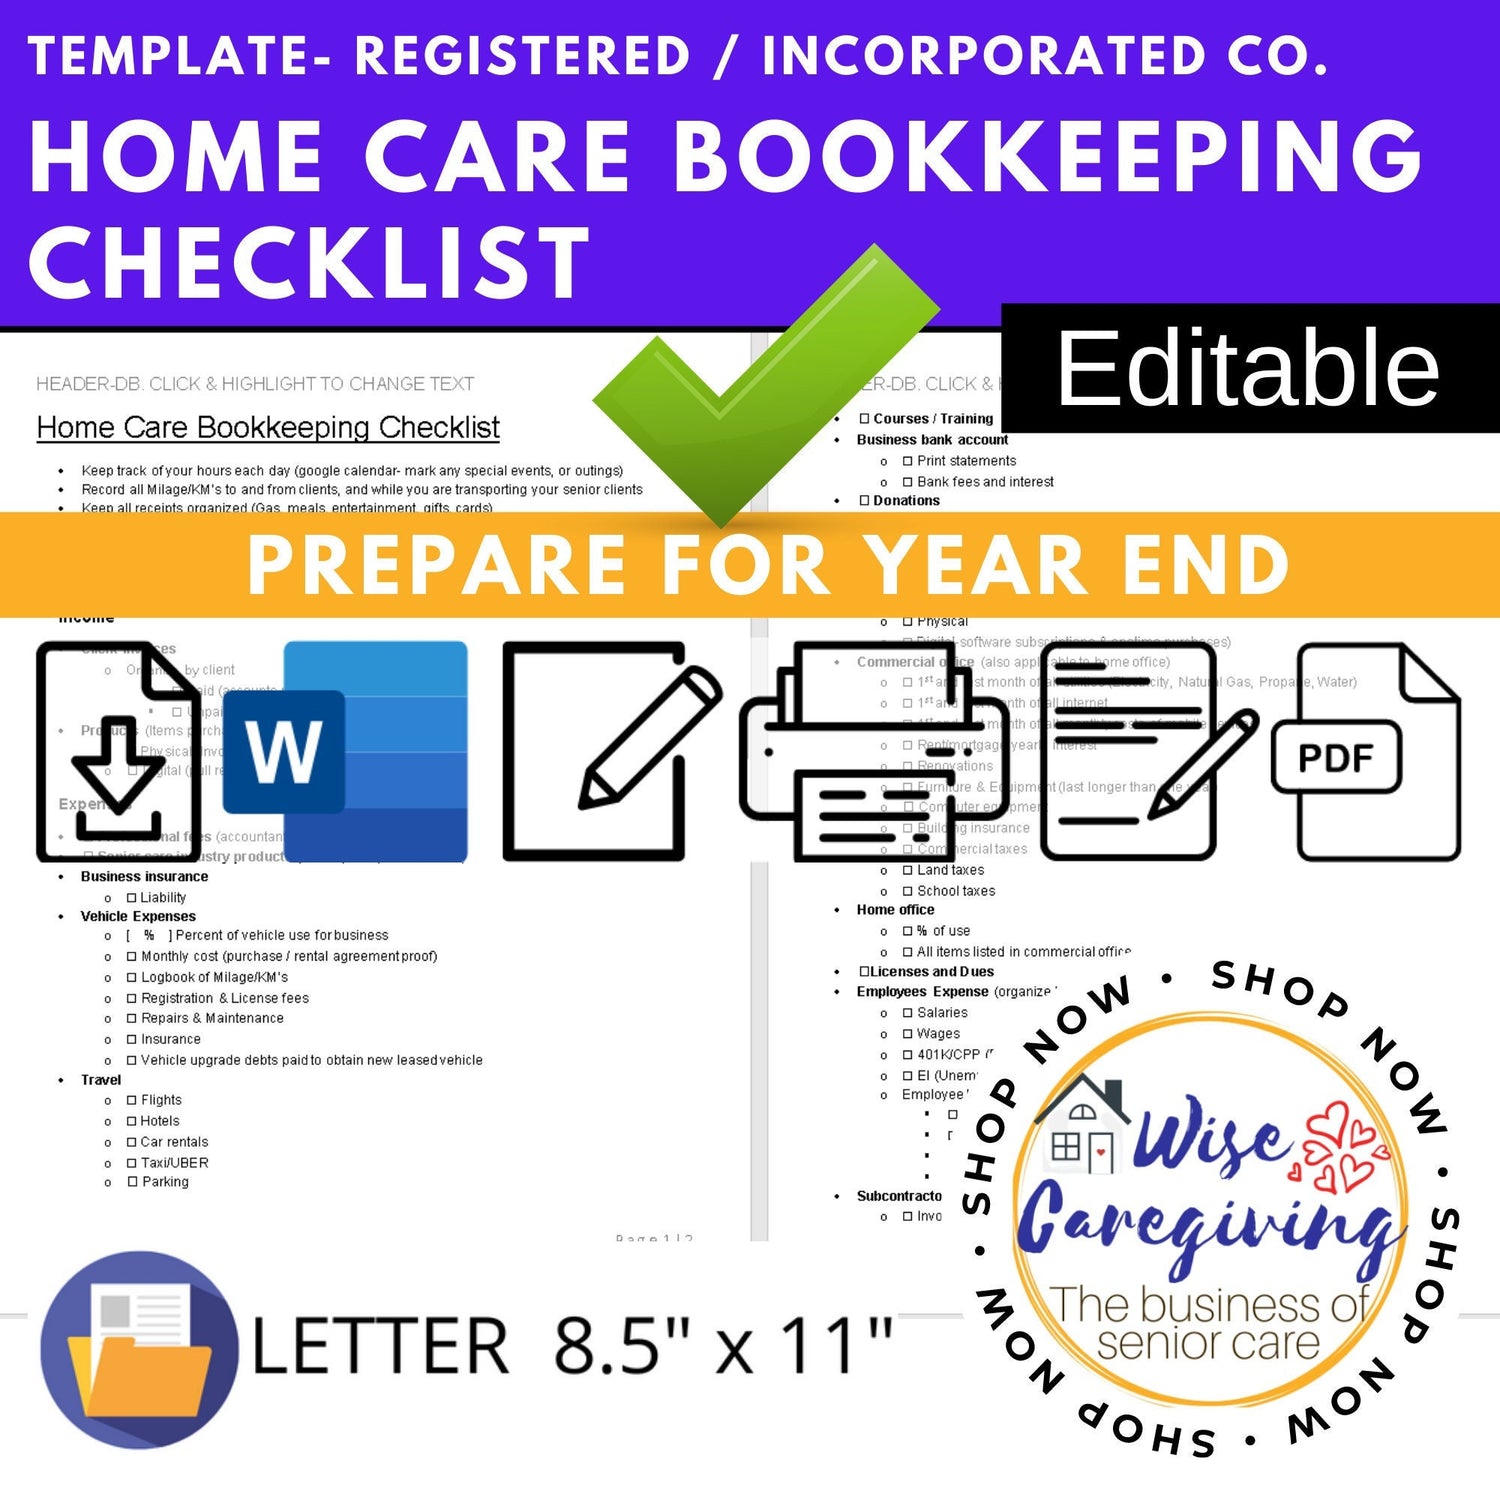 Home Care Bookkeeping Checklist